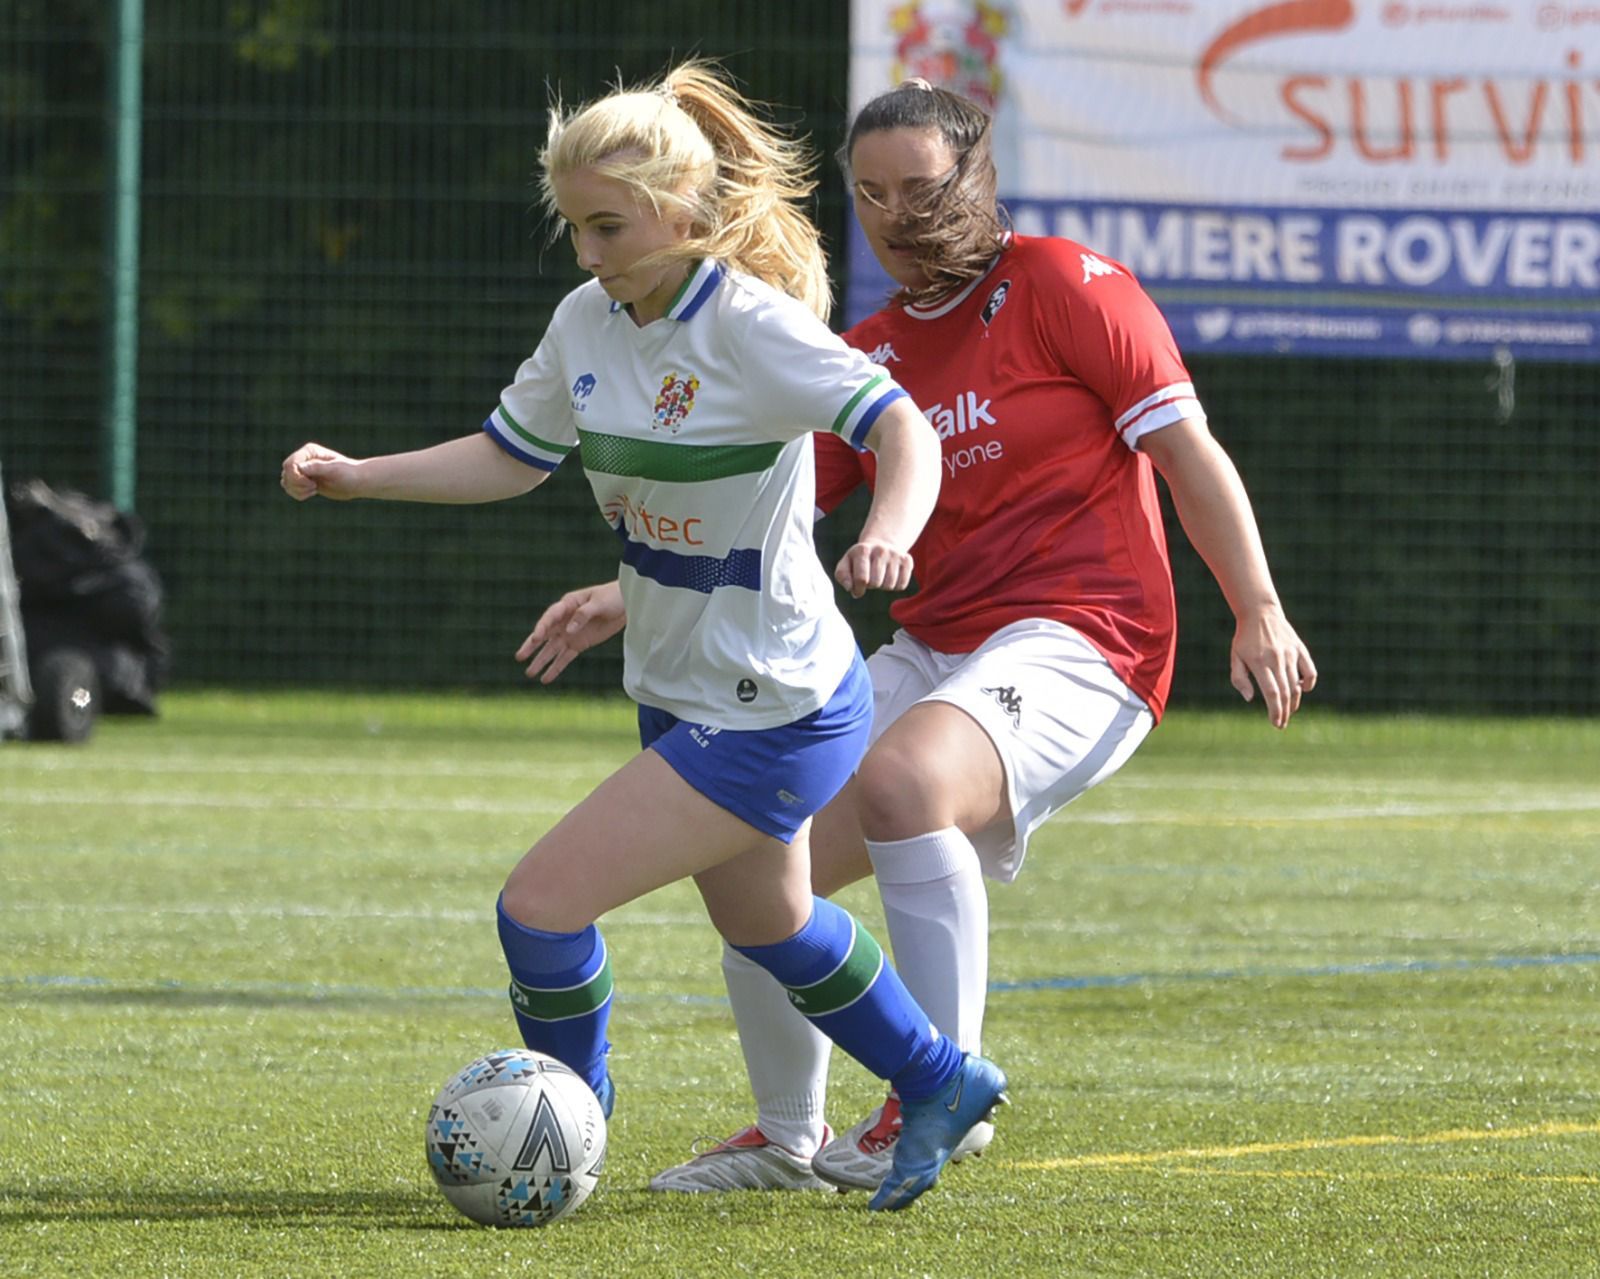 Tranmere Women in action against Salford City. Photo: Tony Coombes